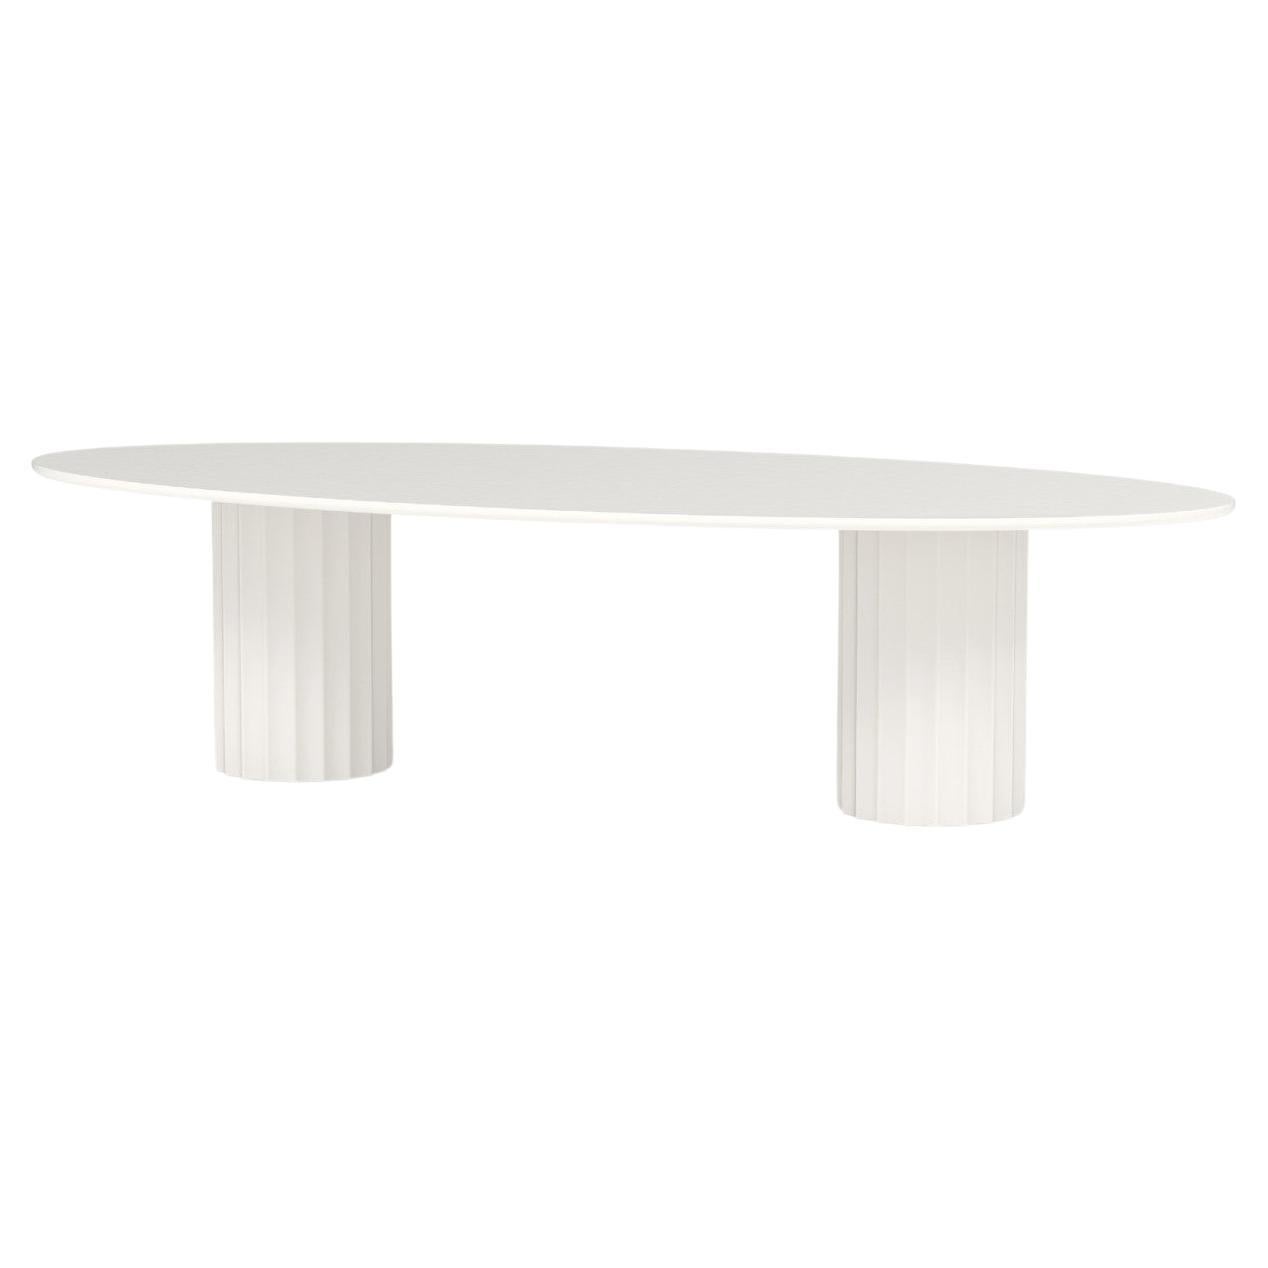 Indoor/Outdoor Dining Table In Matte White Lacquering For Sale